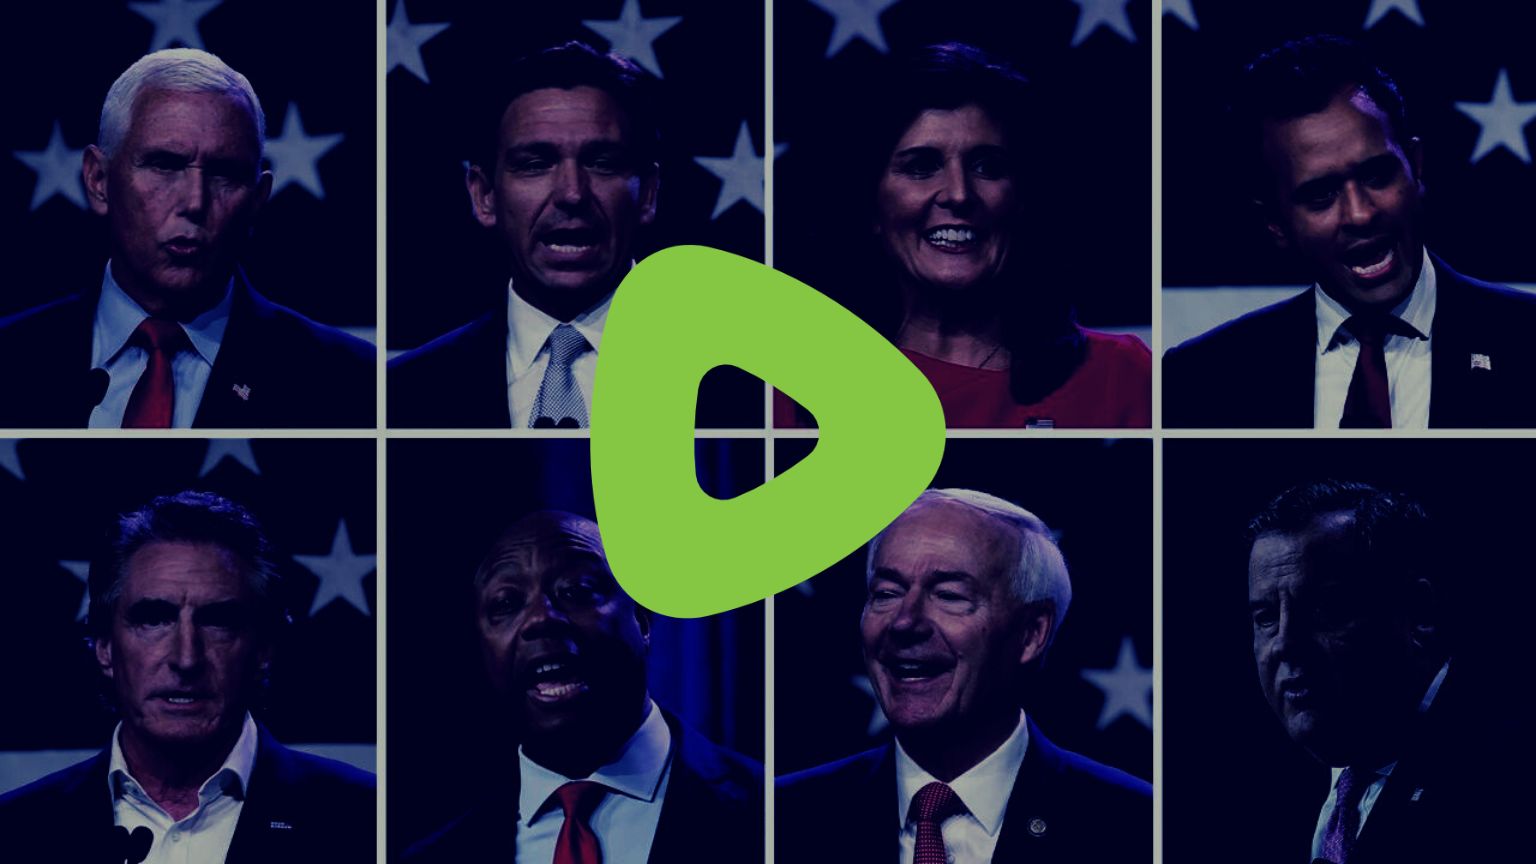 How To Stream The Republican Primary Debate For Free on Rumble